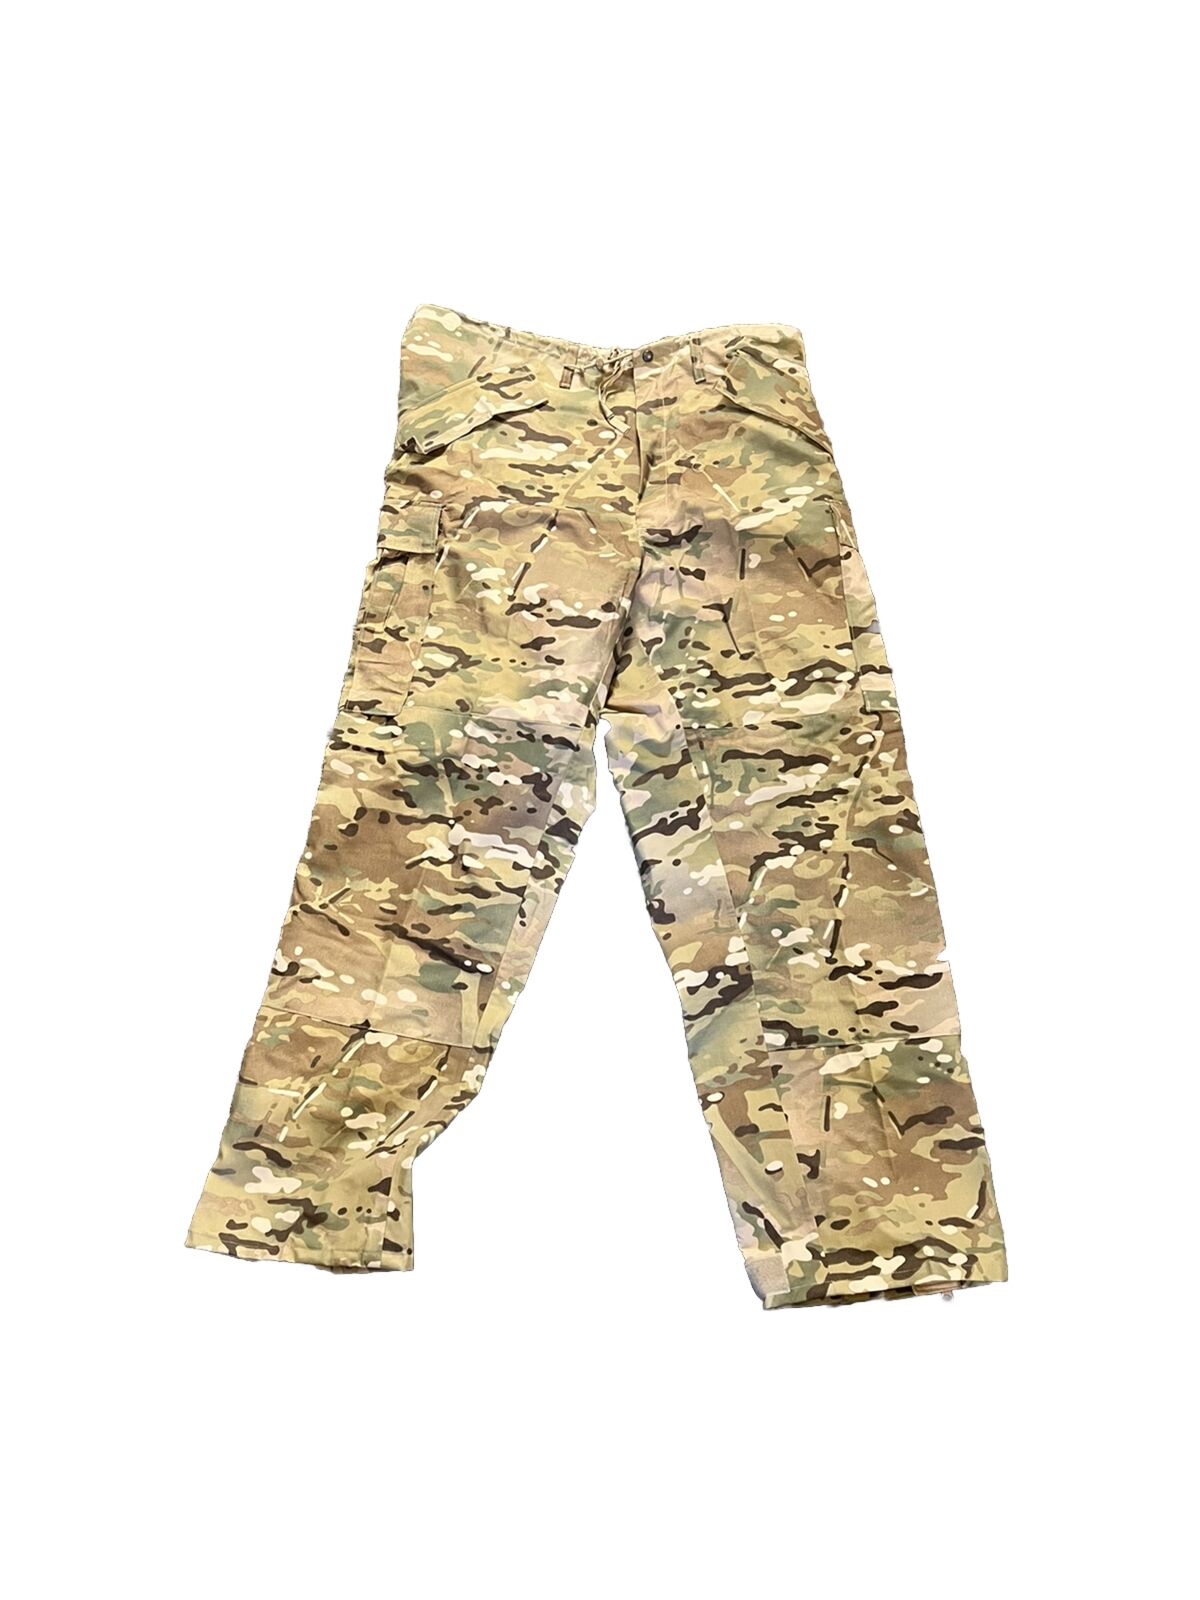 NWOT MENS US ARMY MILITARY APEC GORE-TEX PANTS TROUSERS MULTICAM SIZE MED Short